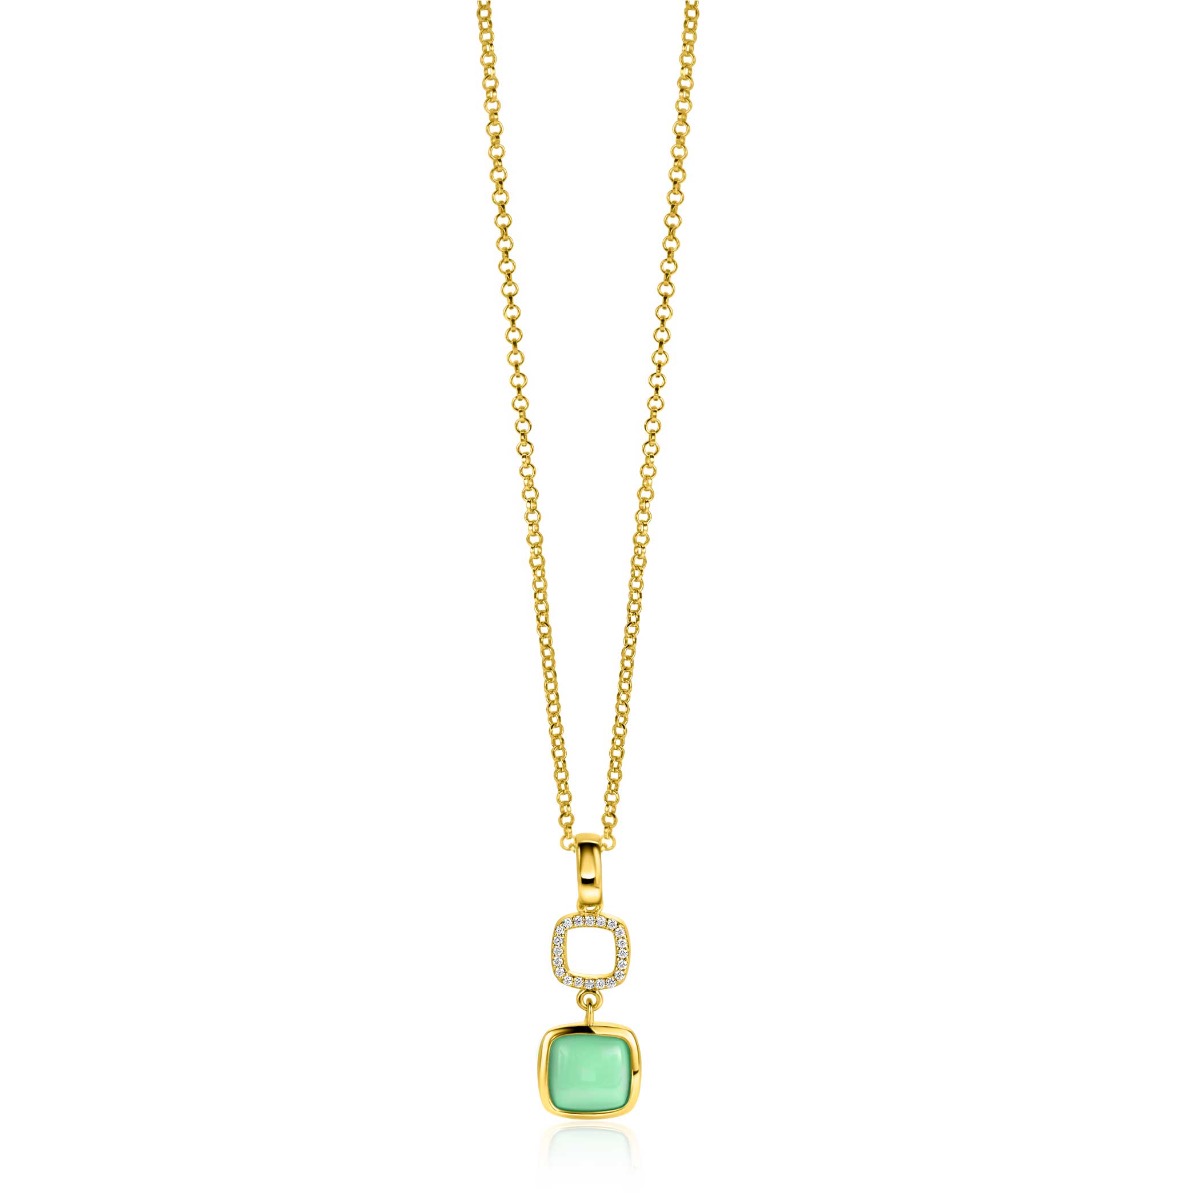 30mm ZINZI Gold Plated Sterling Silver Pendant Square Two-sided with White Onyx and Mint Green Color Stone ZIH2308 (excl. necklace)